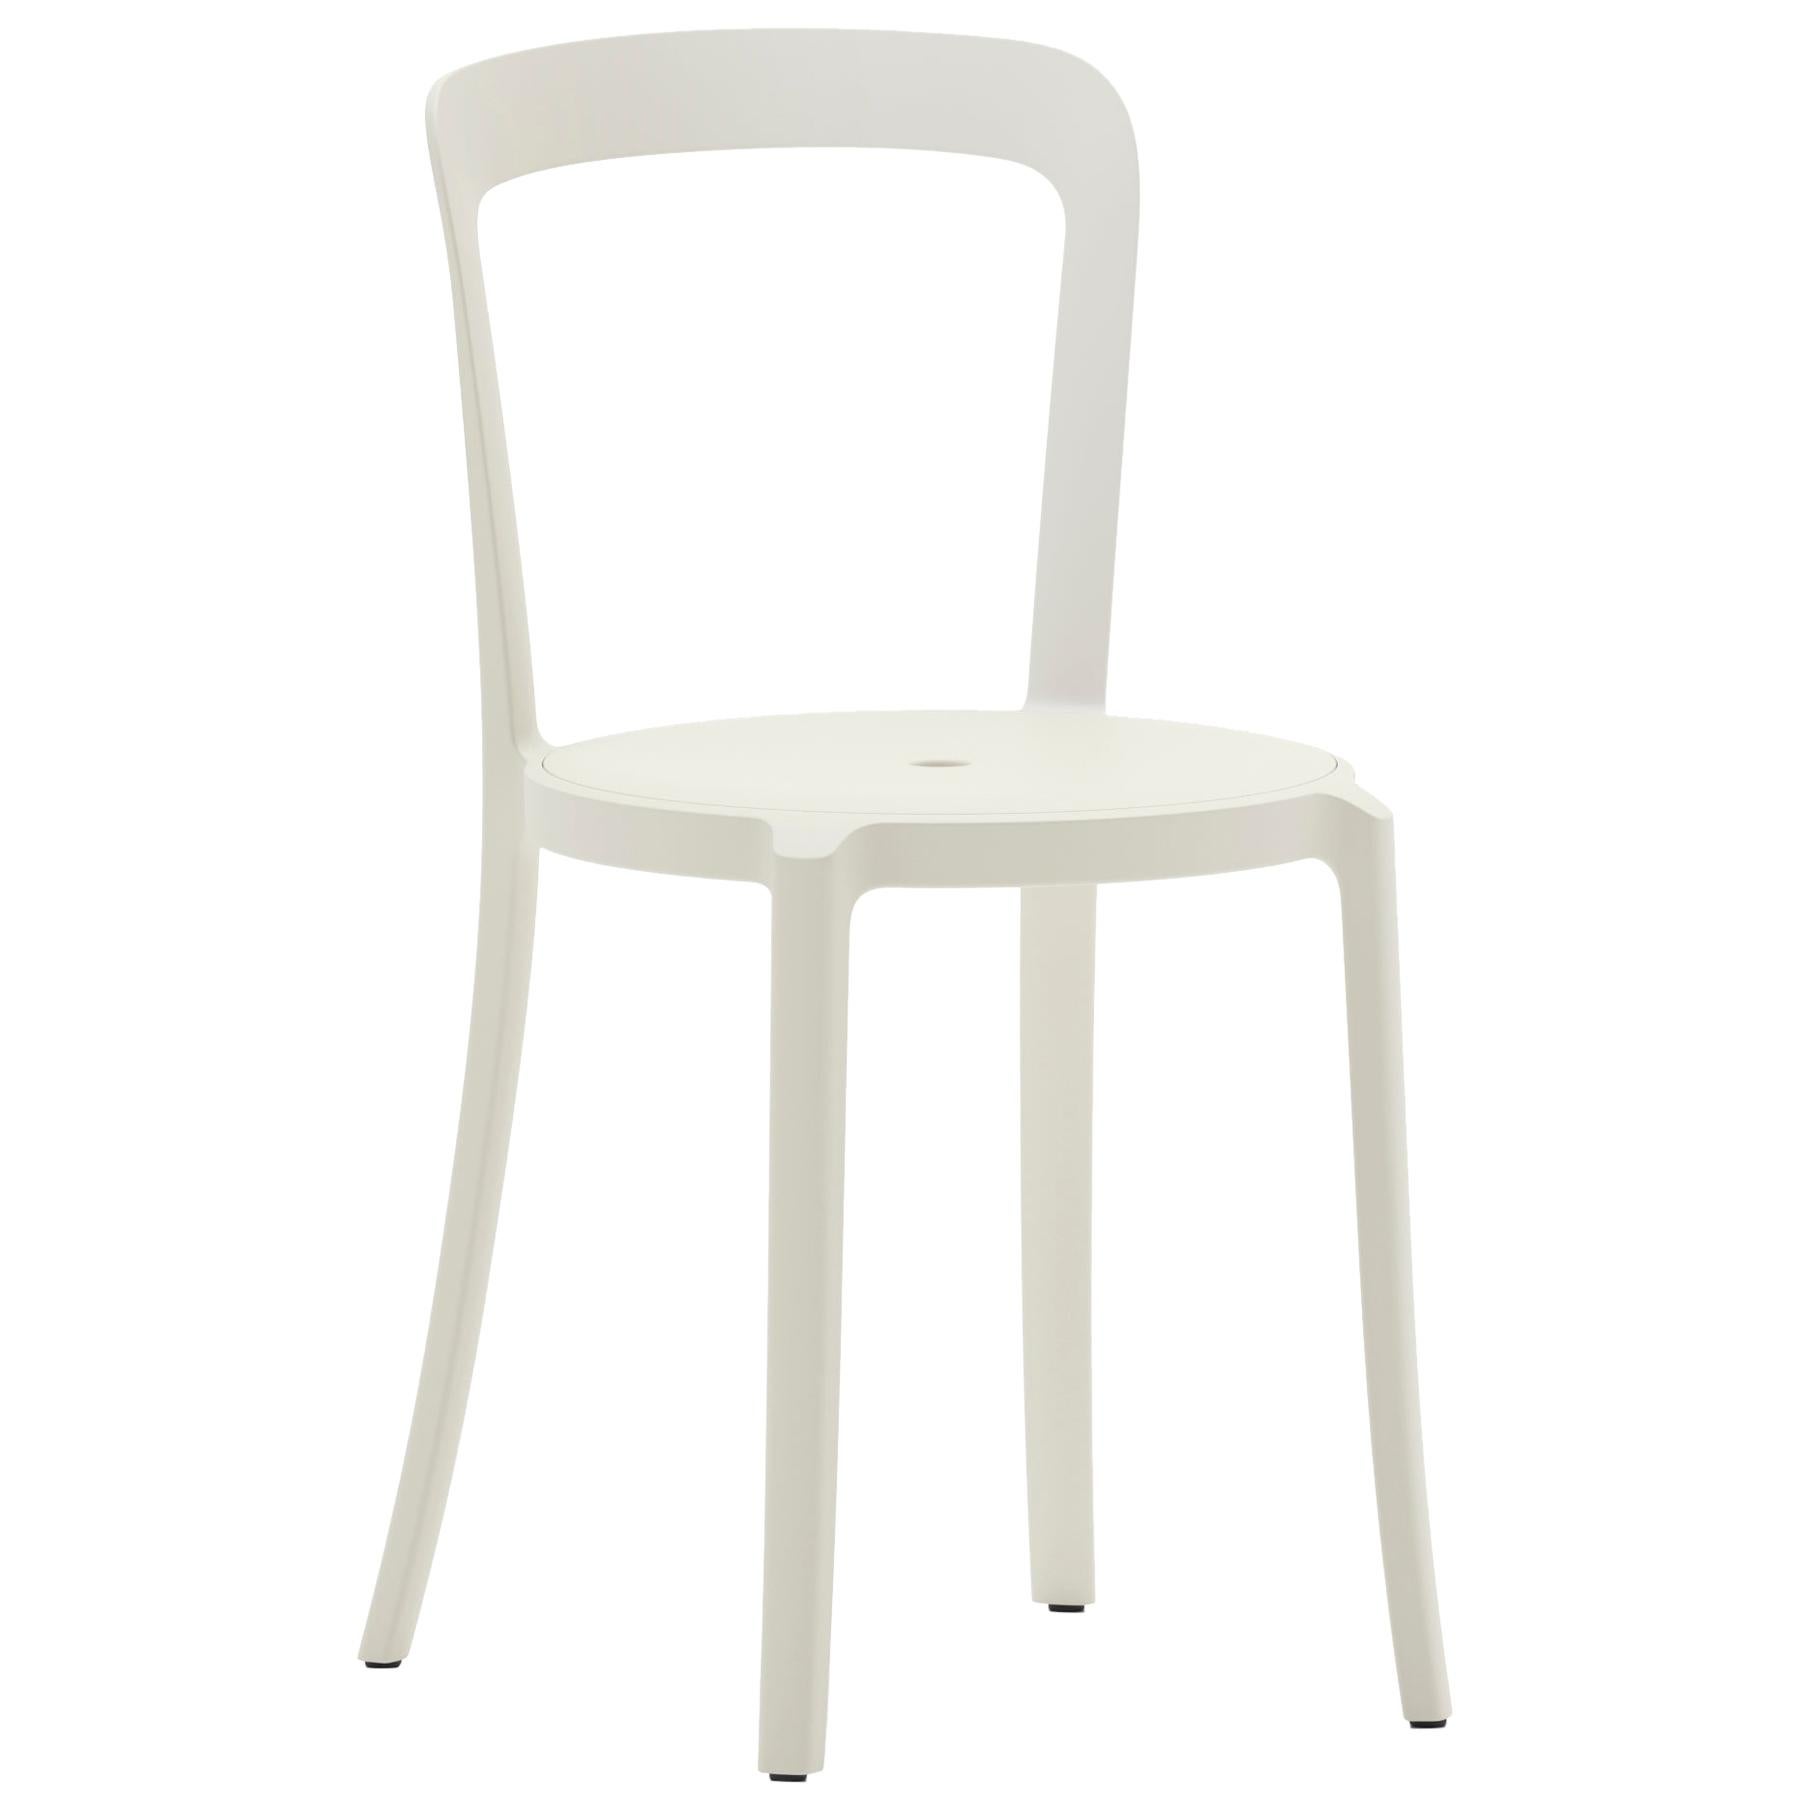 Emeco On & On Stacking Chair in White Plastic by Barber & Osgerby For Sale